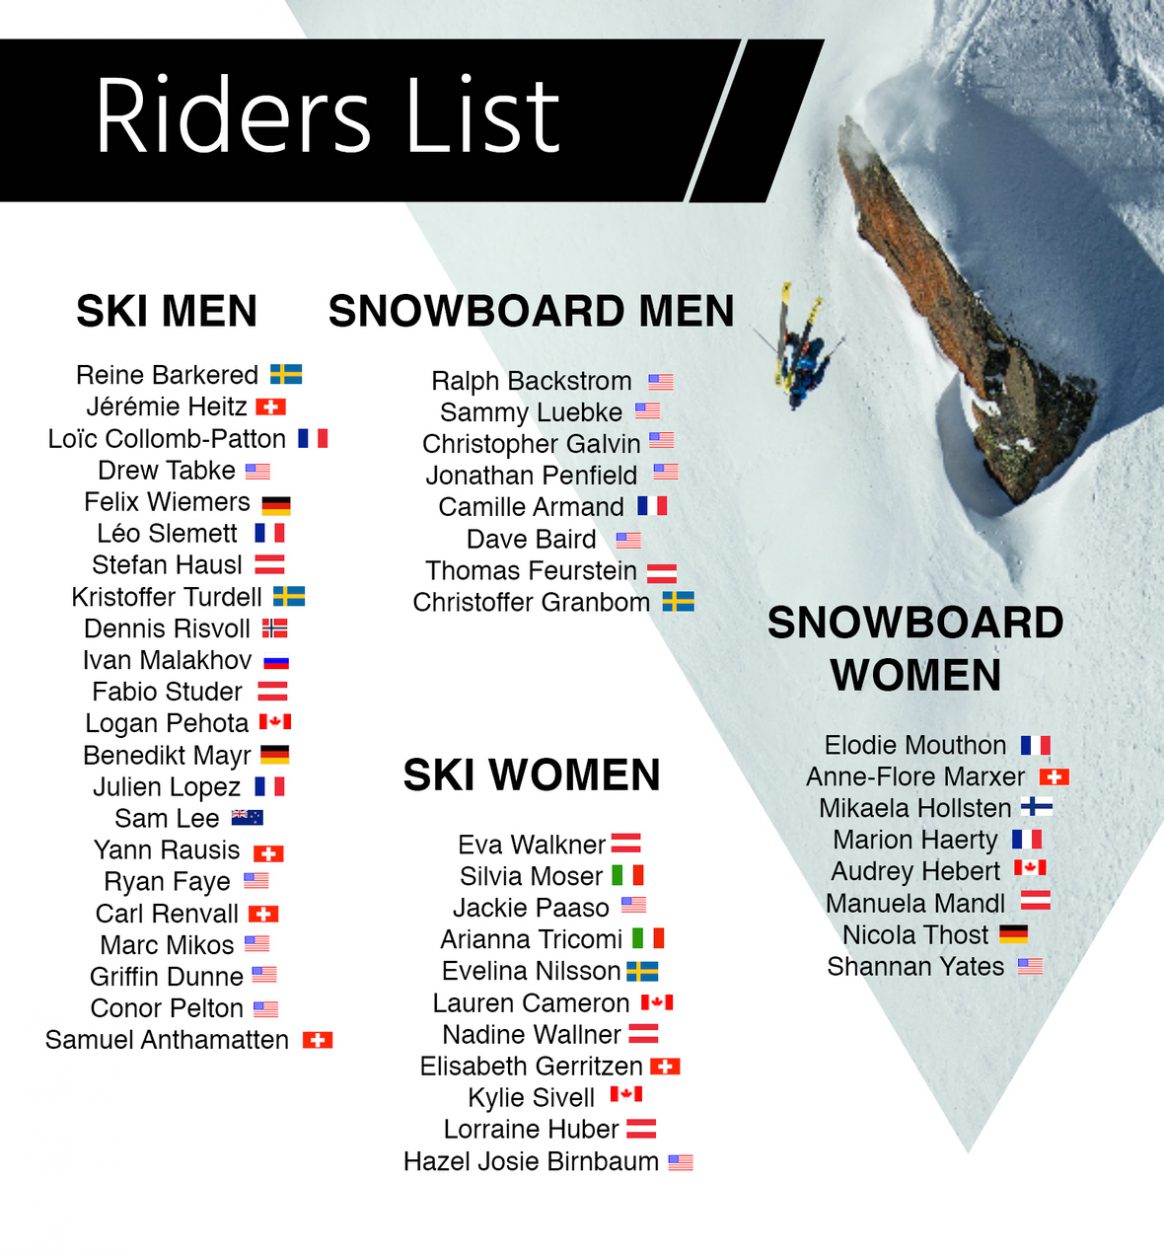 The athlete roster for the 2017 Freeride World Tour.